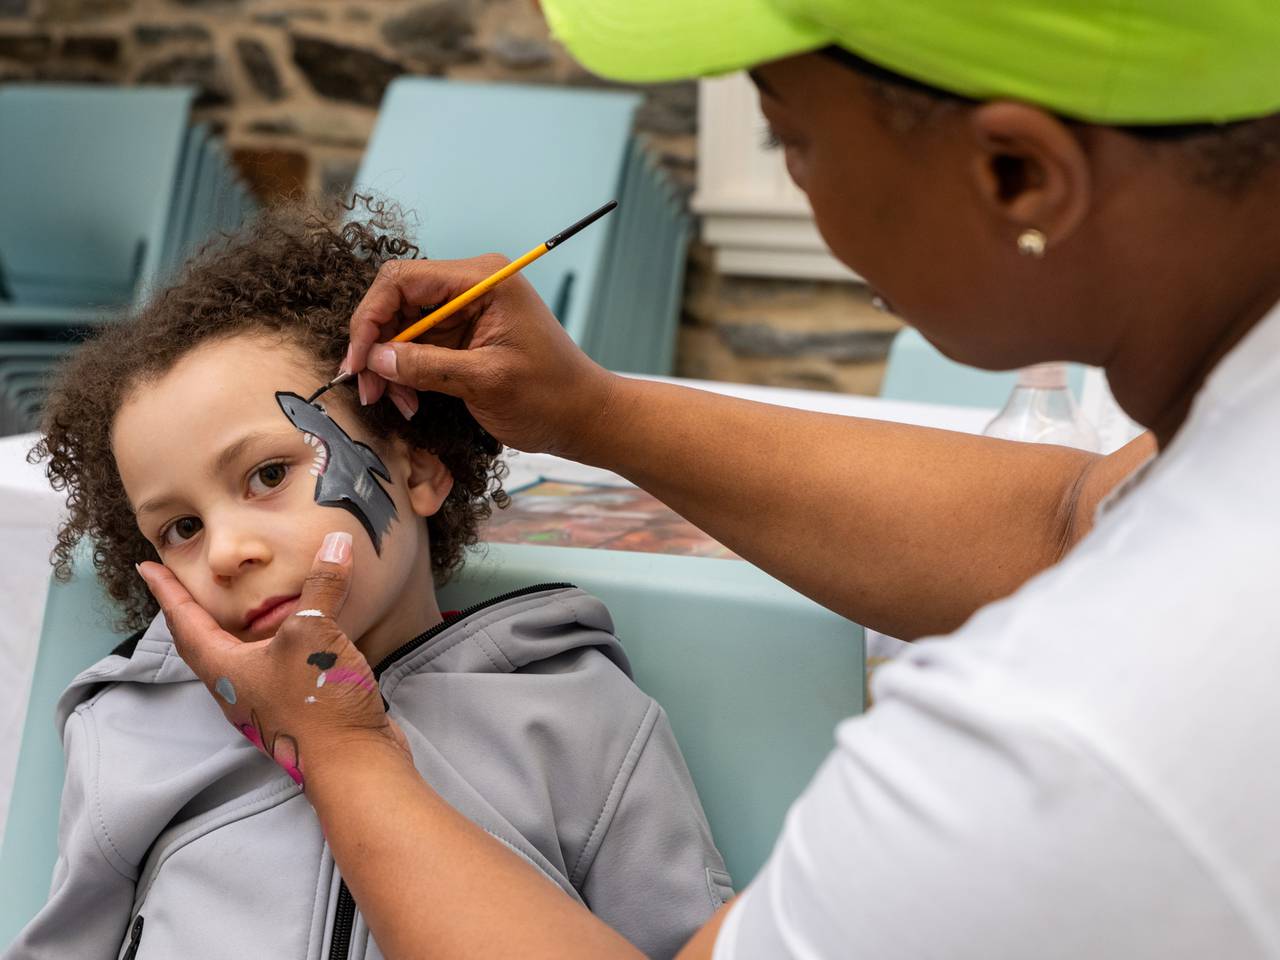 Adam Creek Rohner, 6, has a shark painted on his face by Sherae Davis of S. Cultured Creative Studios. Parks & People Easter Egg Hunt, Mar 30 2024, Baltimore, MD.